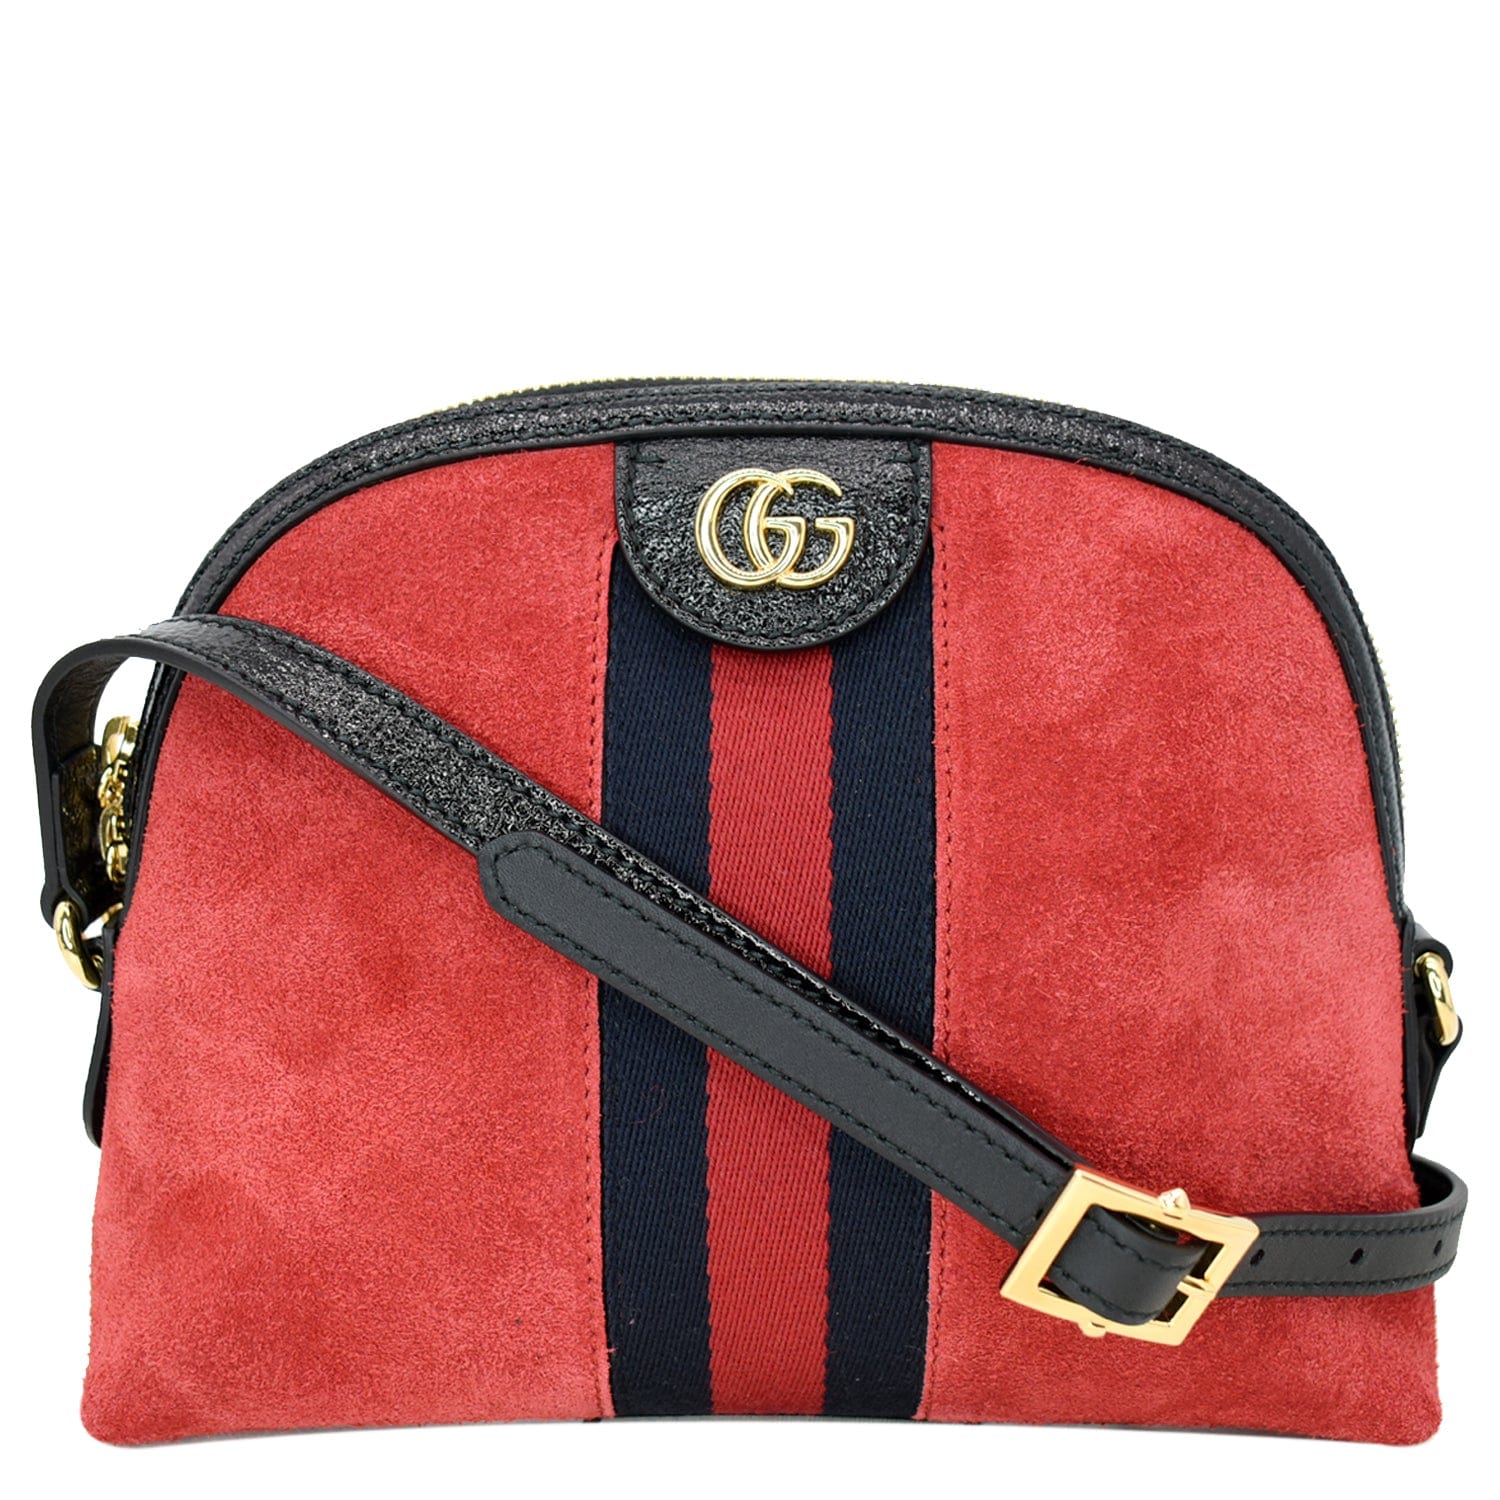 RED VALENTINO Suede Crossbody Bag Made in Italy